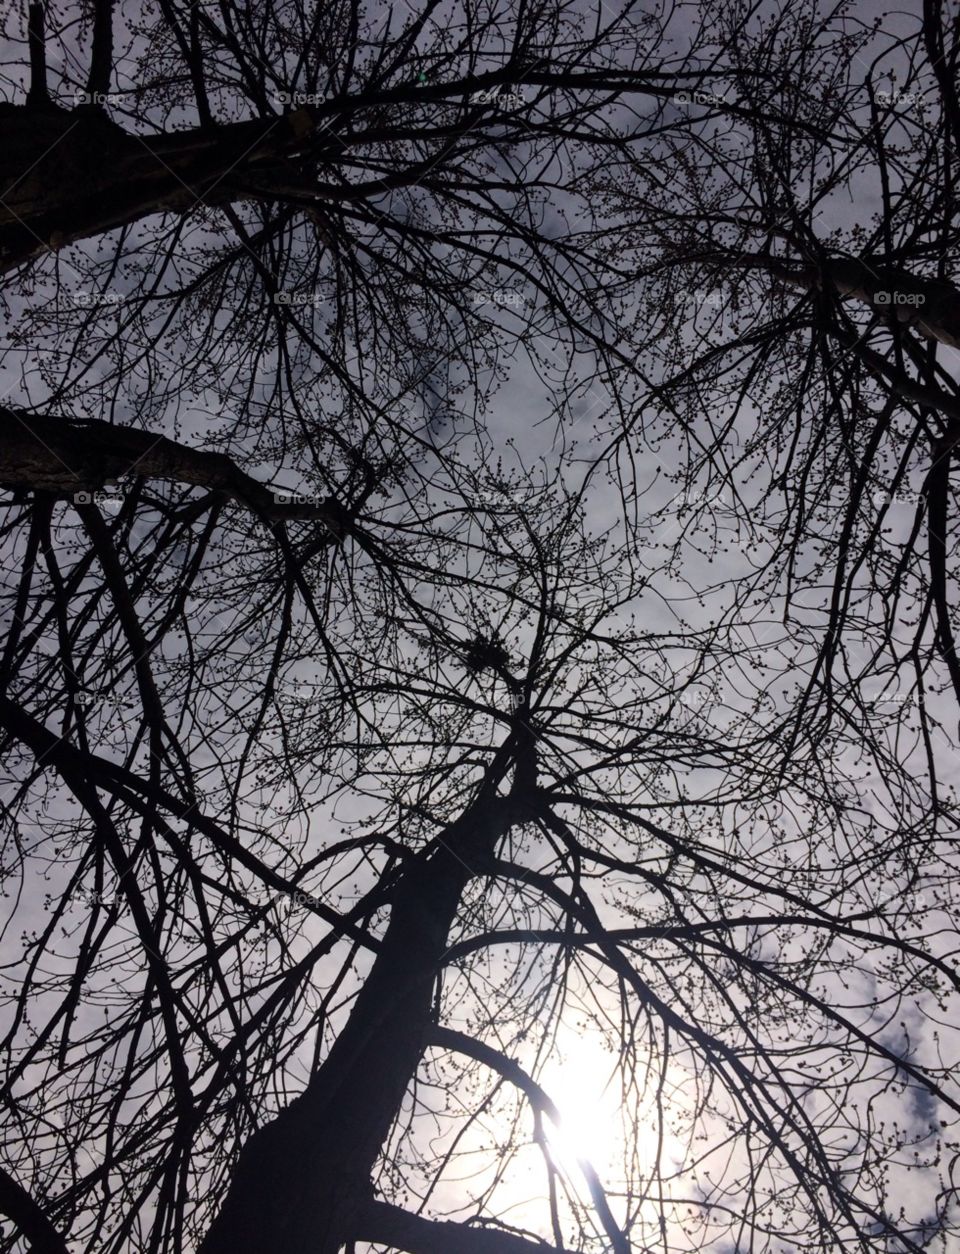 Looking up into the tree 